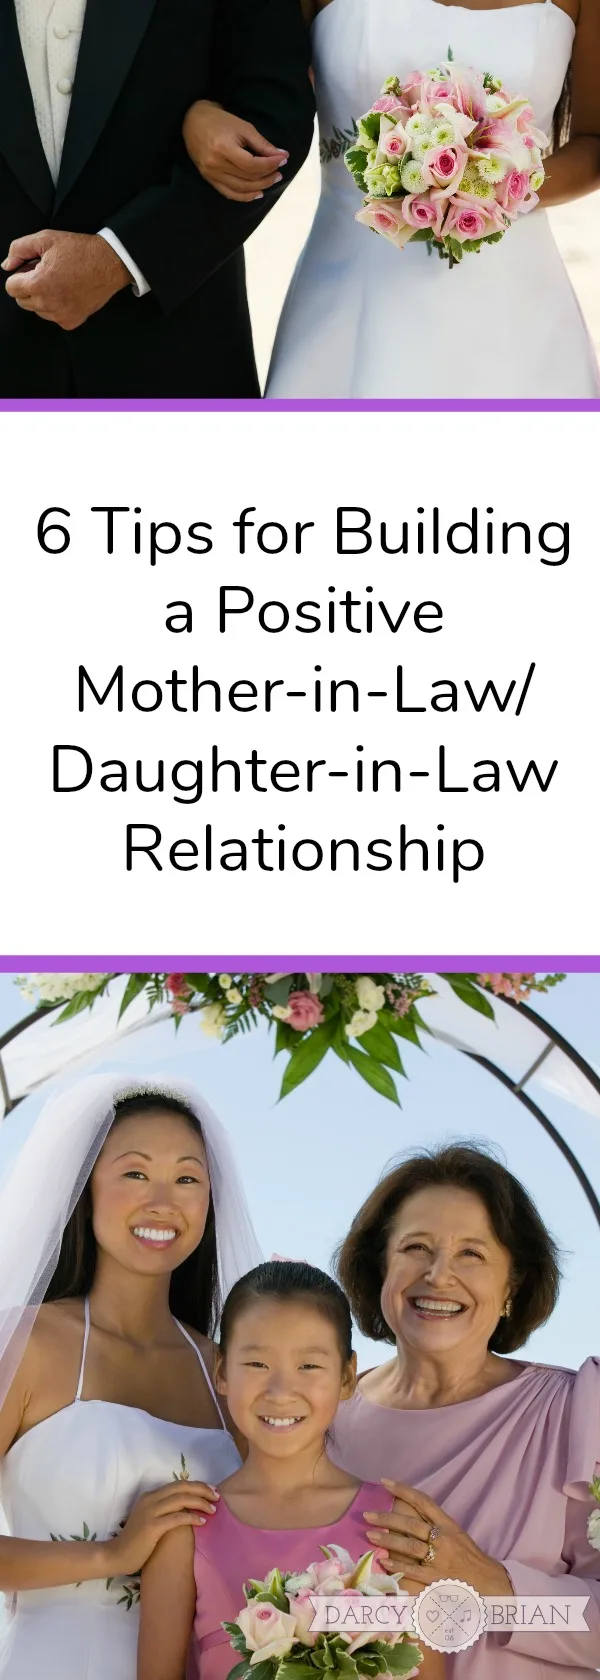 Great tips for welcoming a new family member. I hate family tension - it's too stressful! Check out these tips on how to build a positive Mother-in-Law/Daughter-in-Law relationship and create a special bond with your in-laws instead.